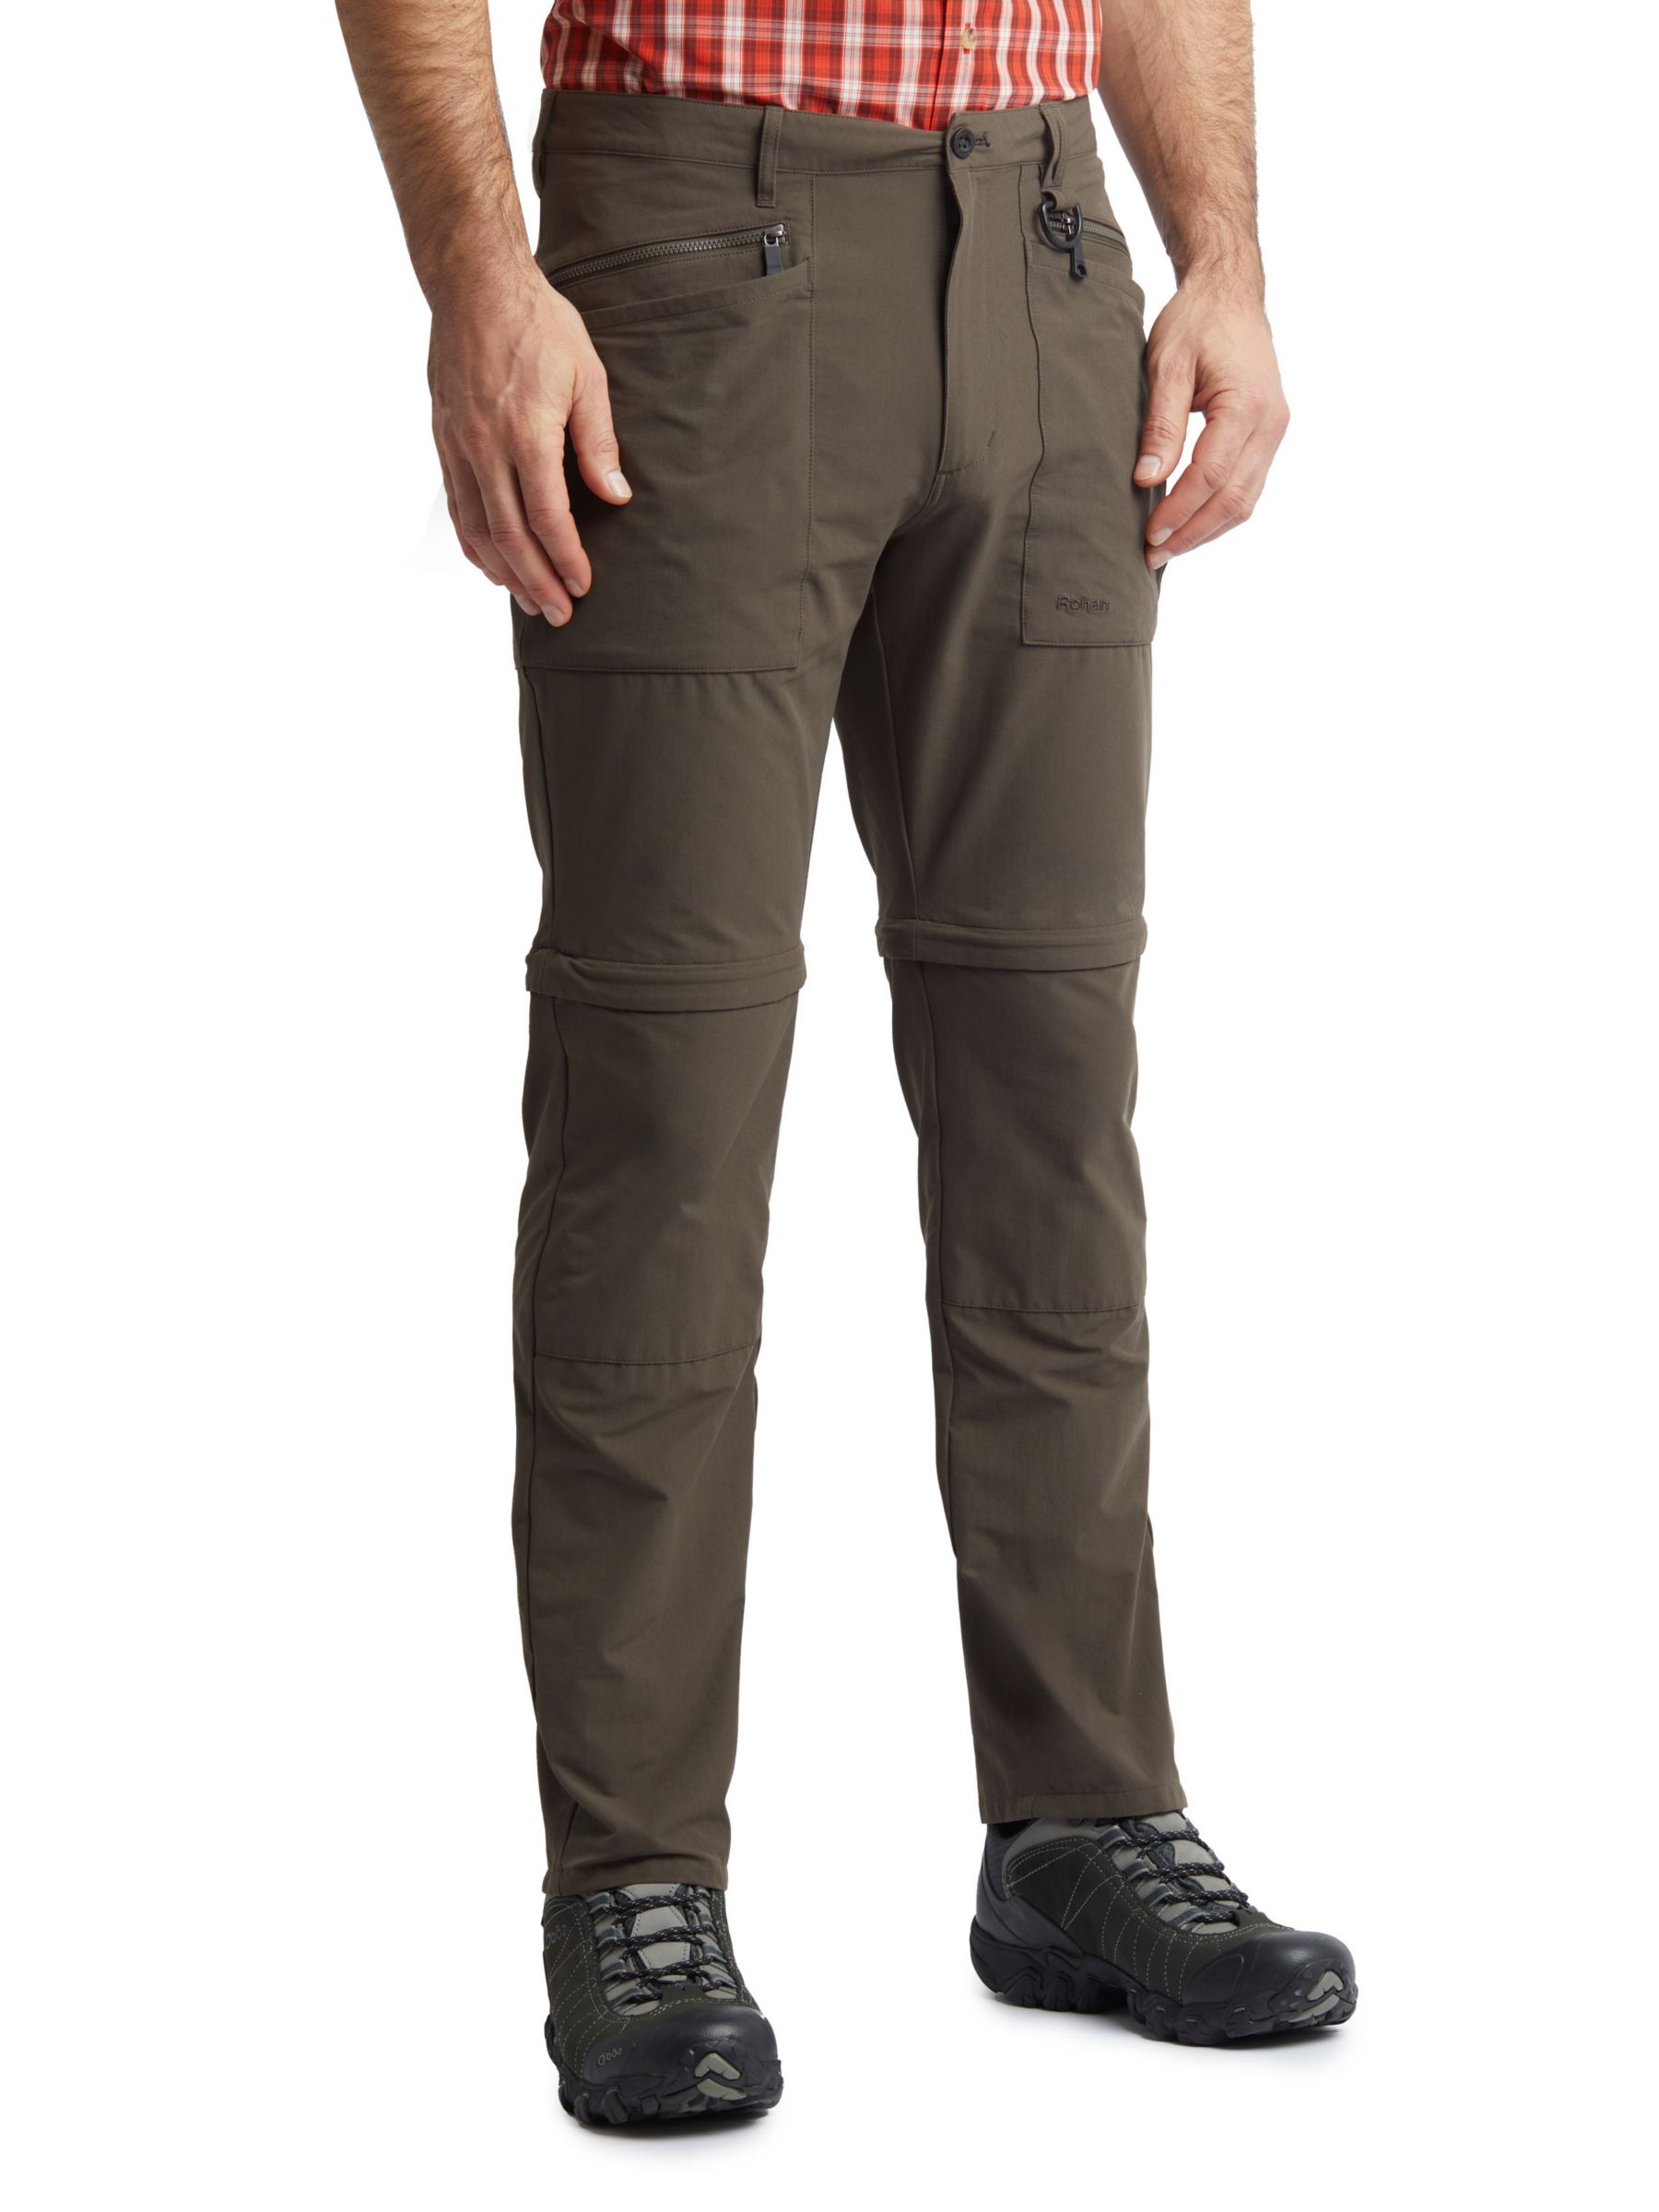 Rohan Stretch Bags Walking Trousers, Dark Olive Brown, 30S